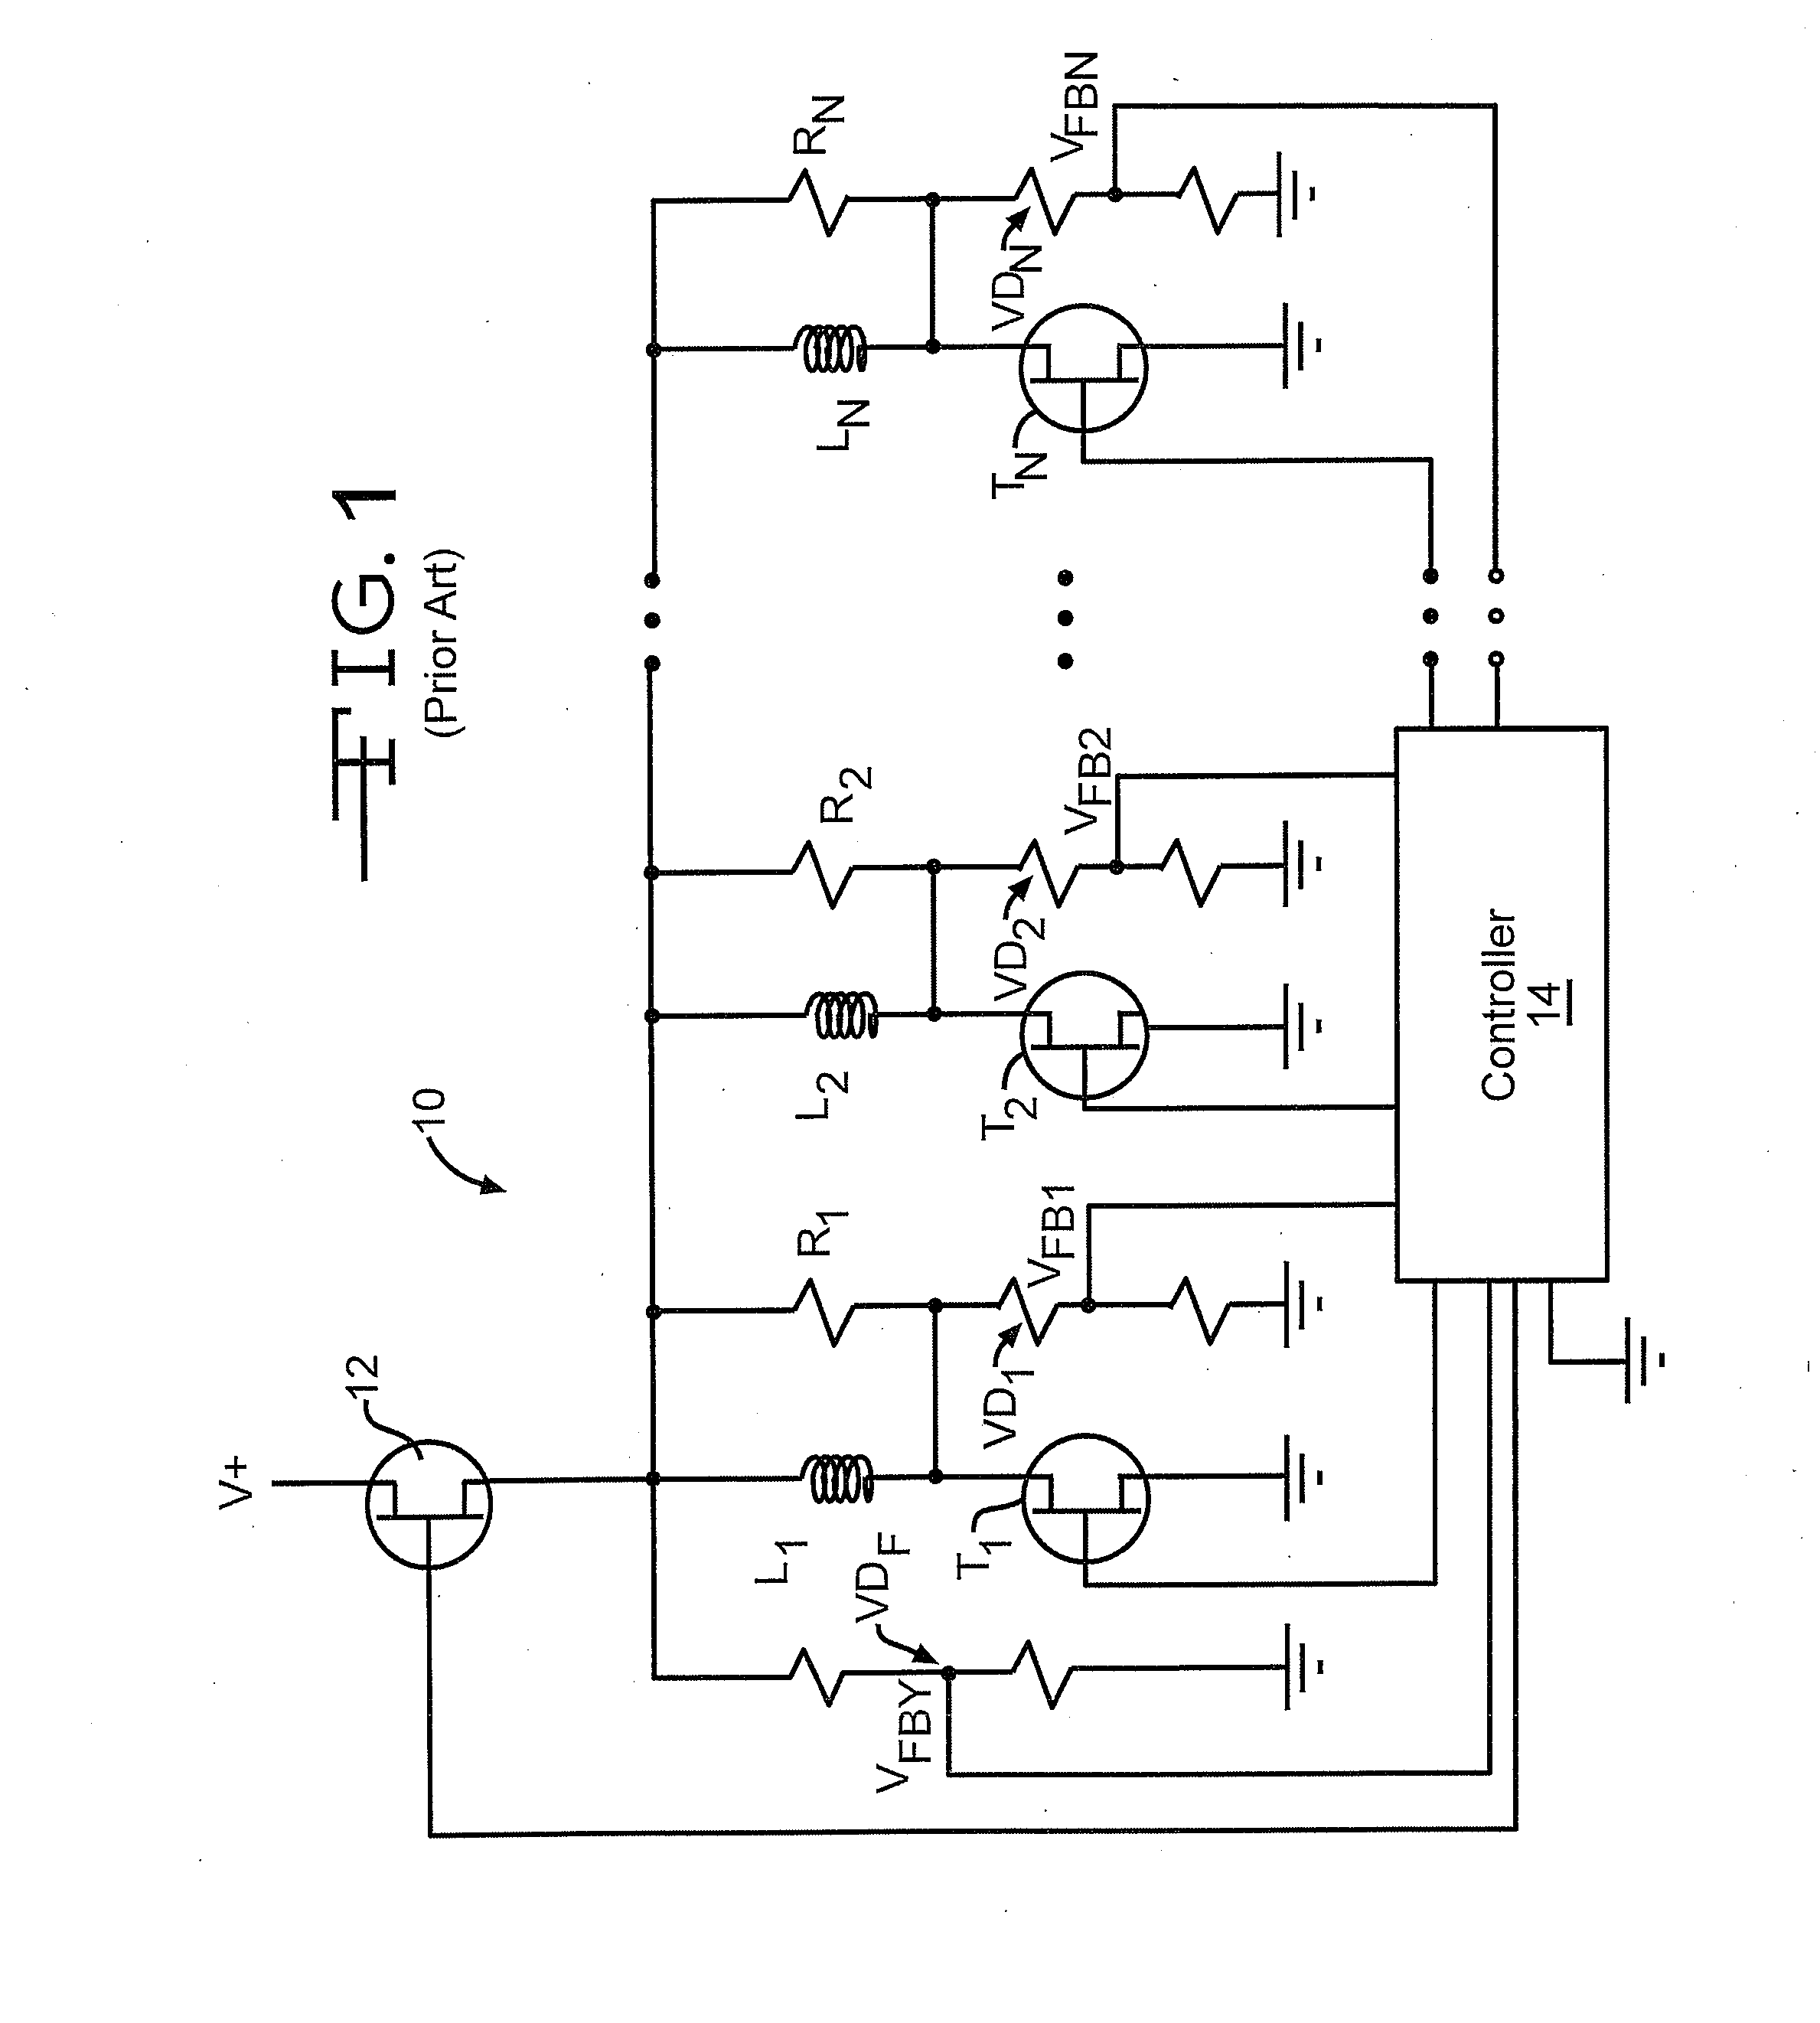 Apparatus and method for detection of solenoid current